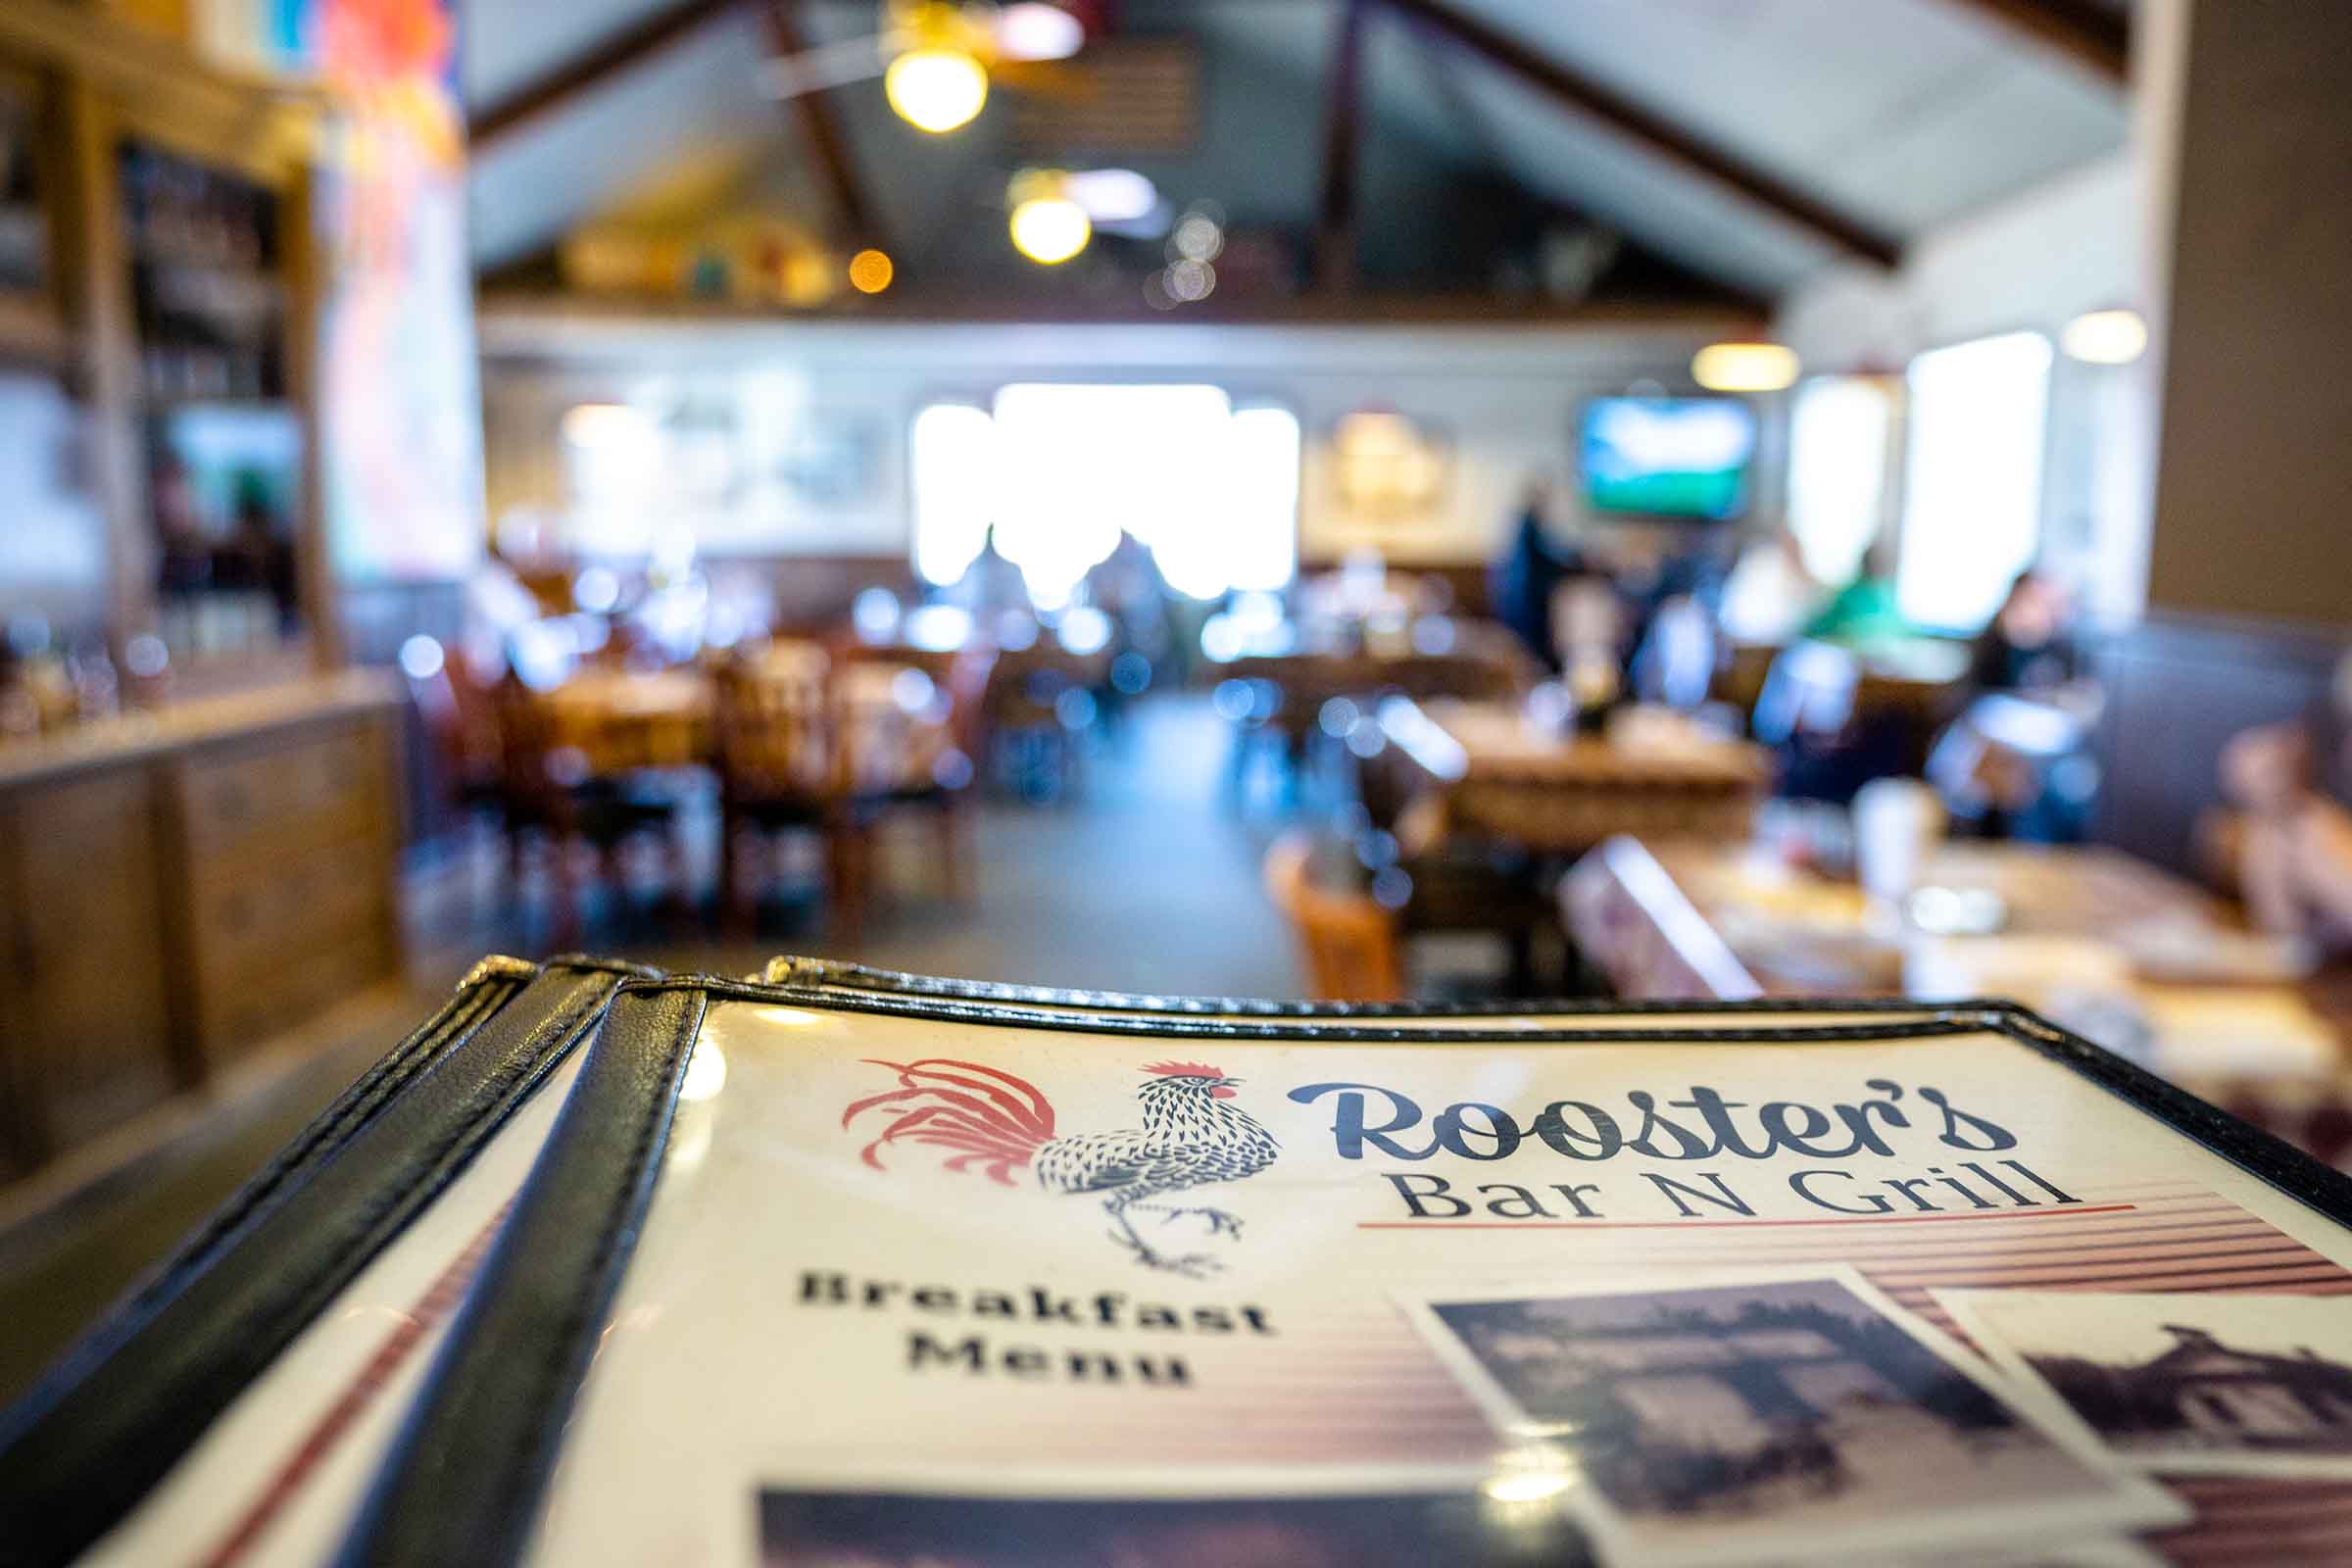 Interior of Roosters Barn and Grill with menu